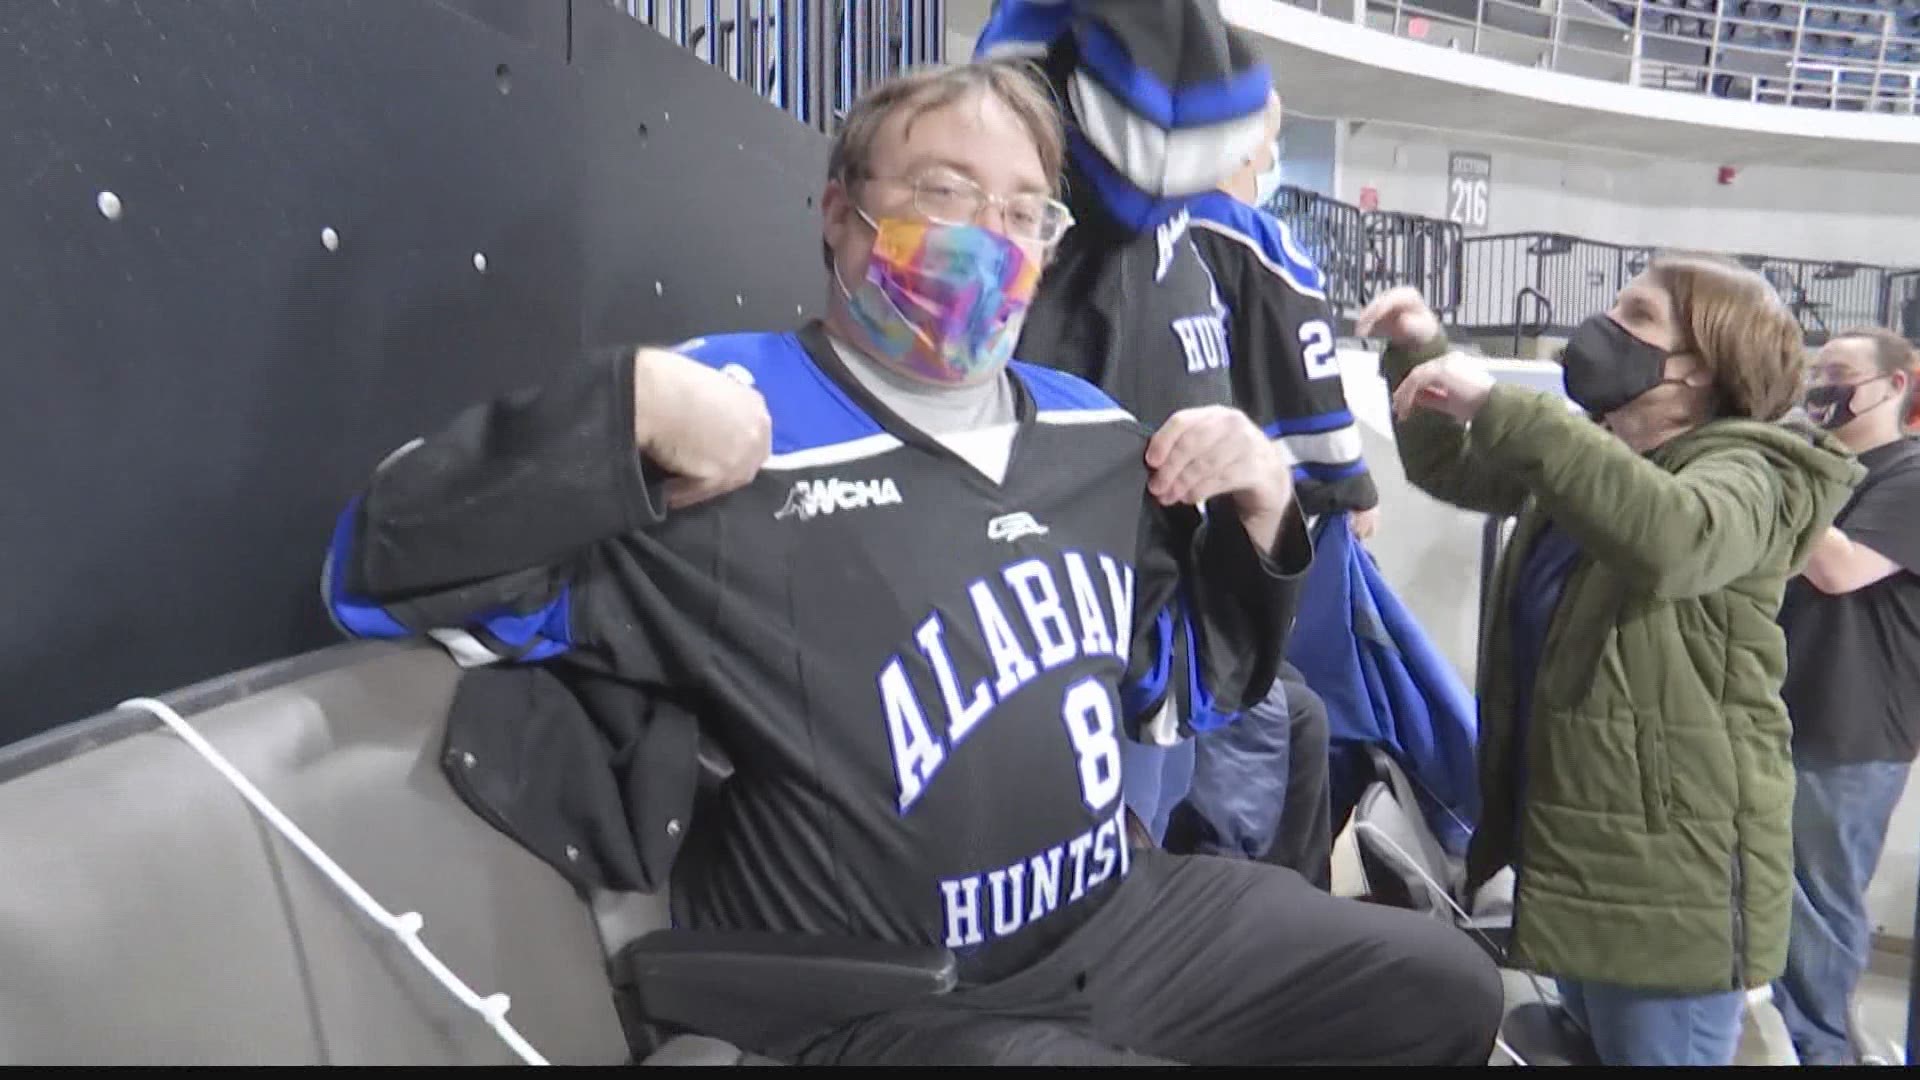 UAH Men's Hockey invited the residents at 305 8th Street to a private practice and donated season tickets to the group.